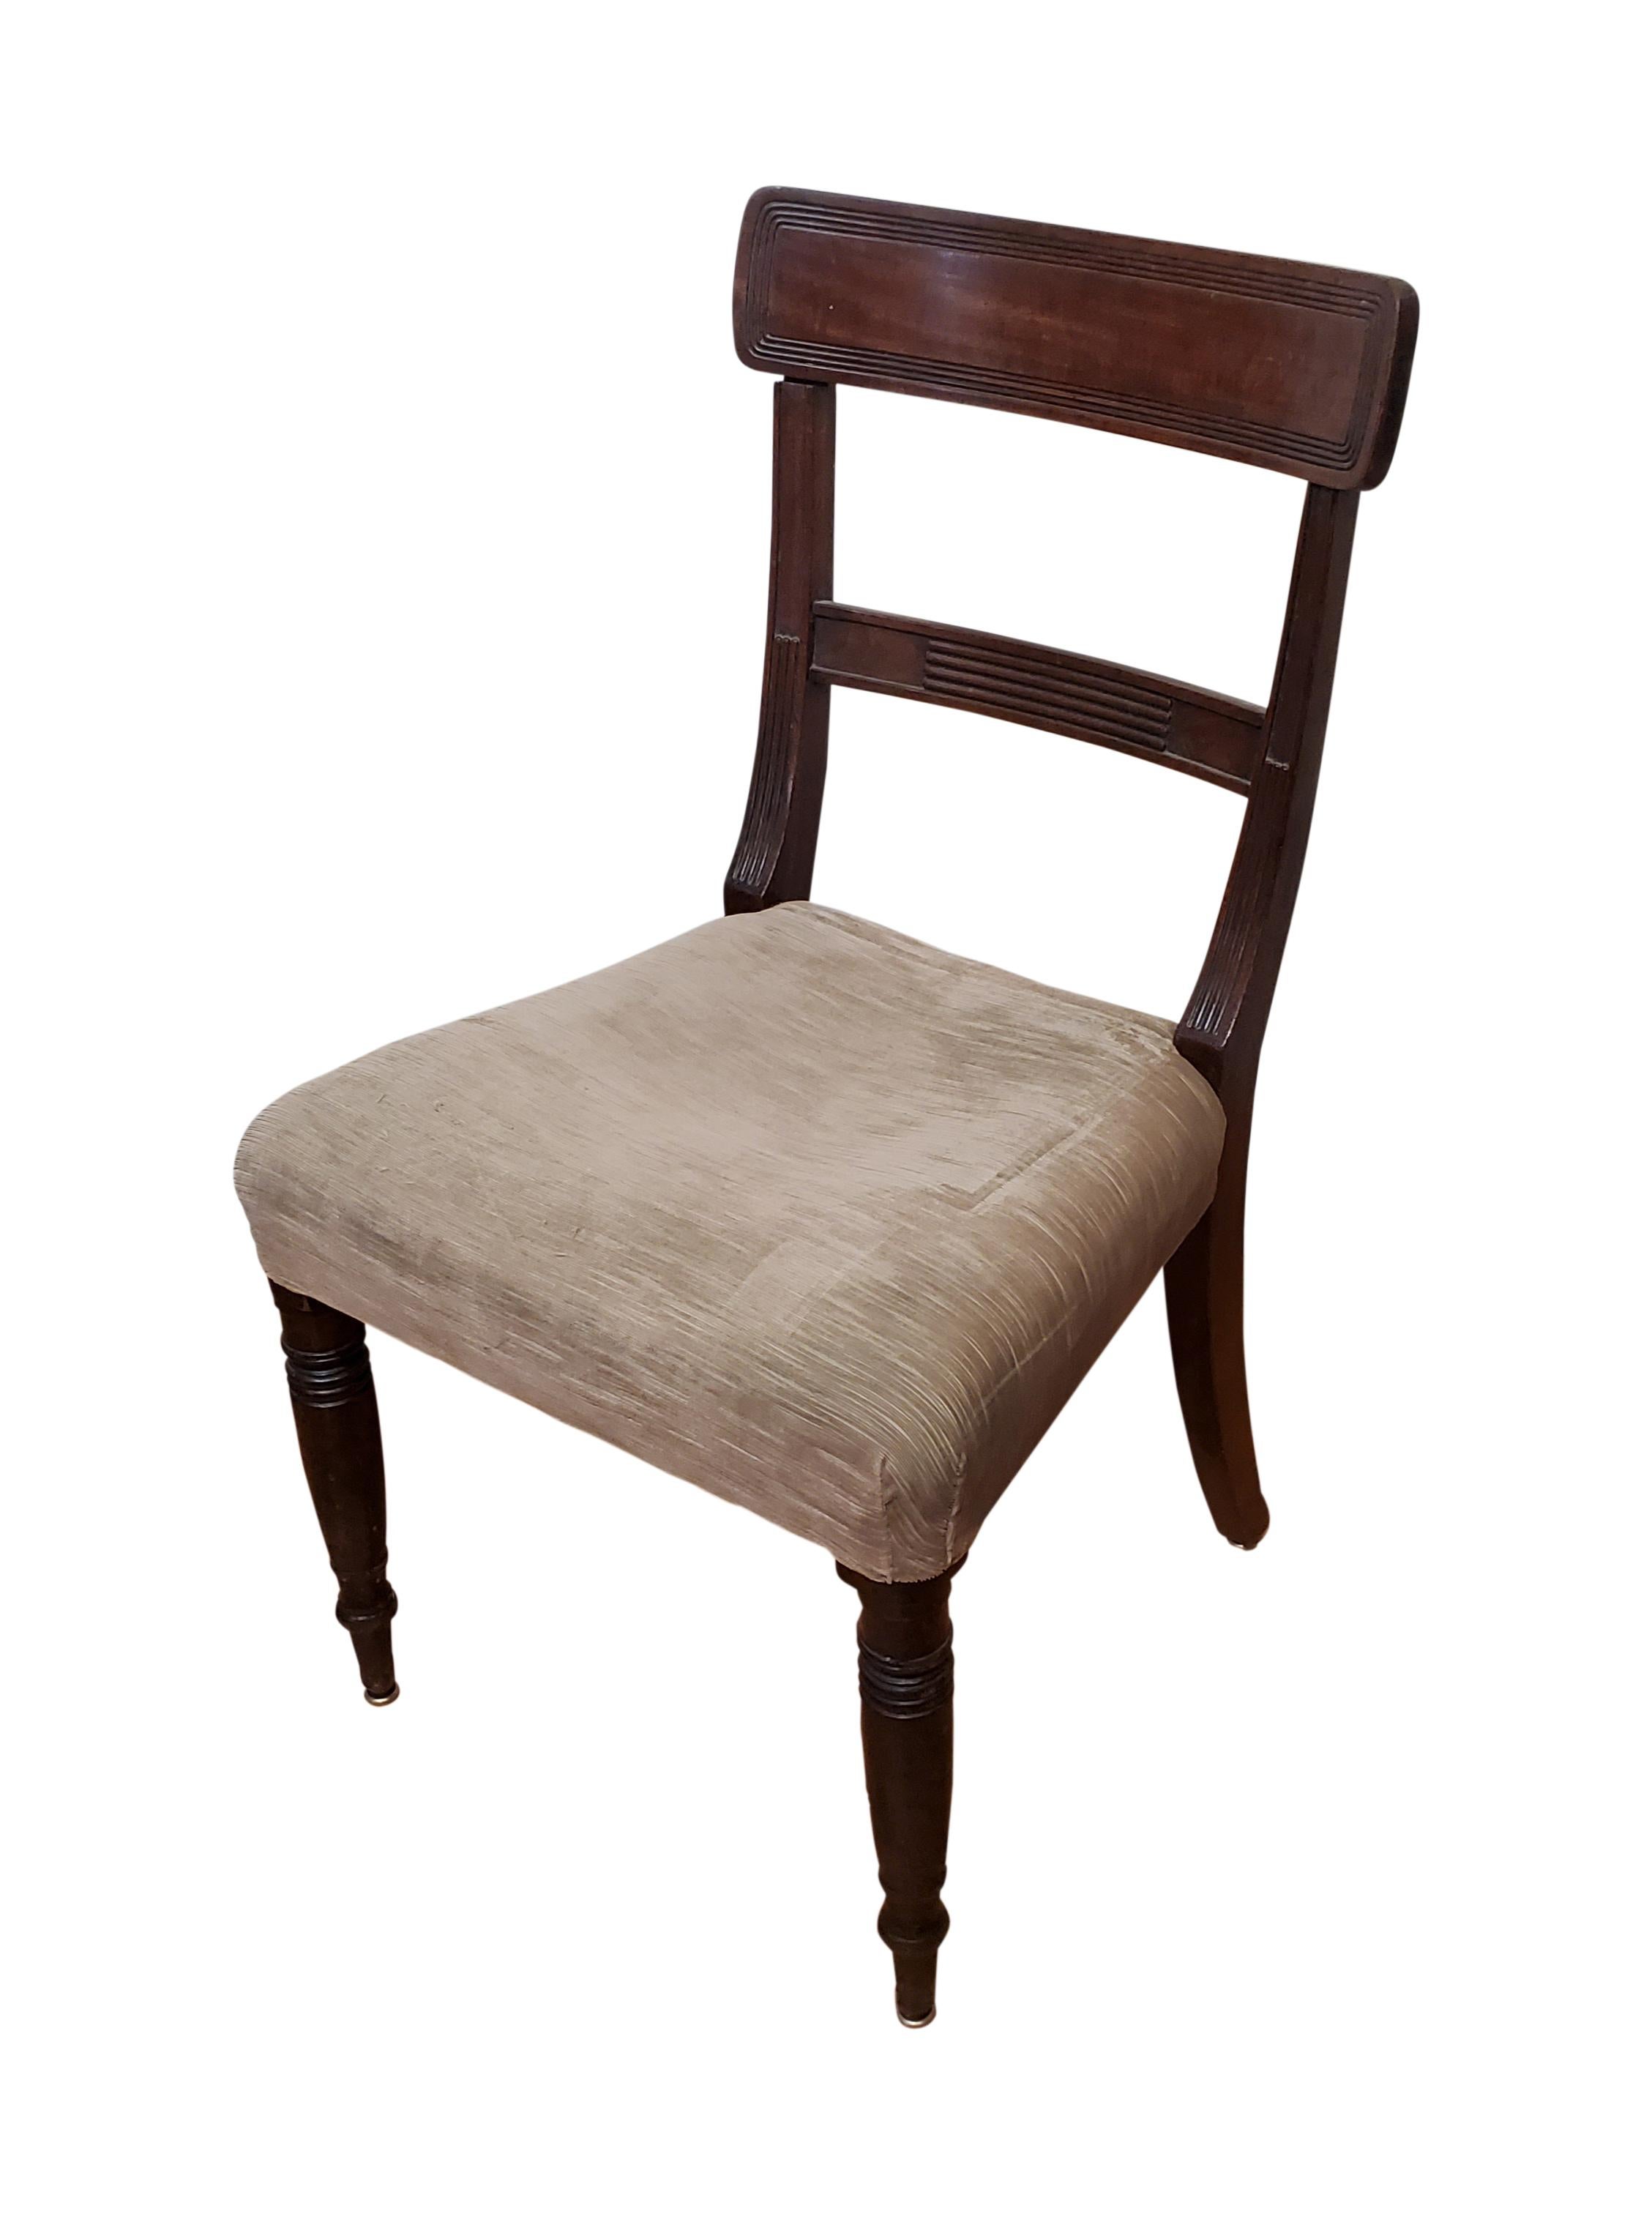 Pair of period side chairs, the seat covering is old and needs to be redone like most upholstered furniture., nice crest and turned legs, the chairs simply need to be recovered and find and new home. Made in the late Regency period, circa 1830.